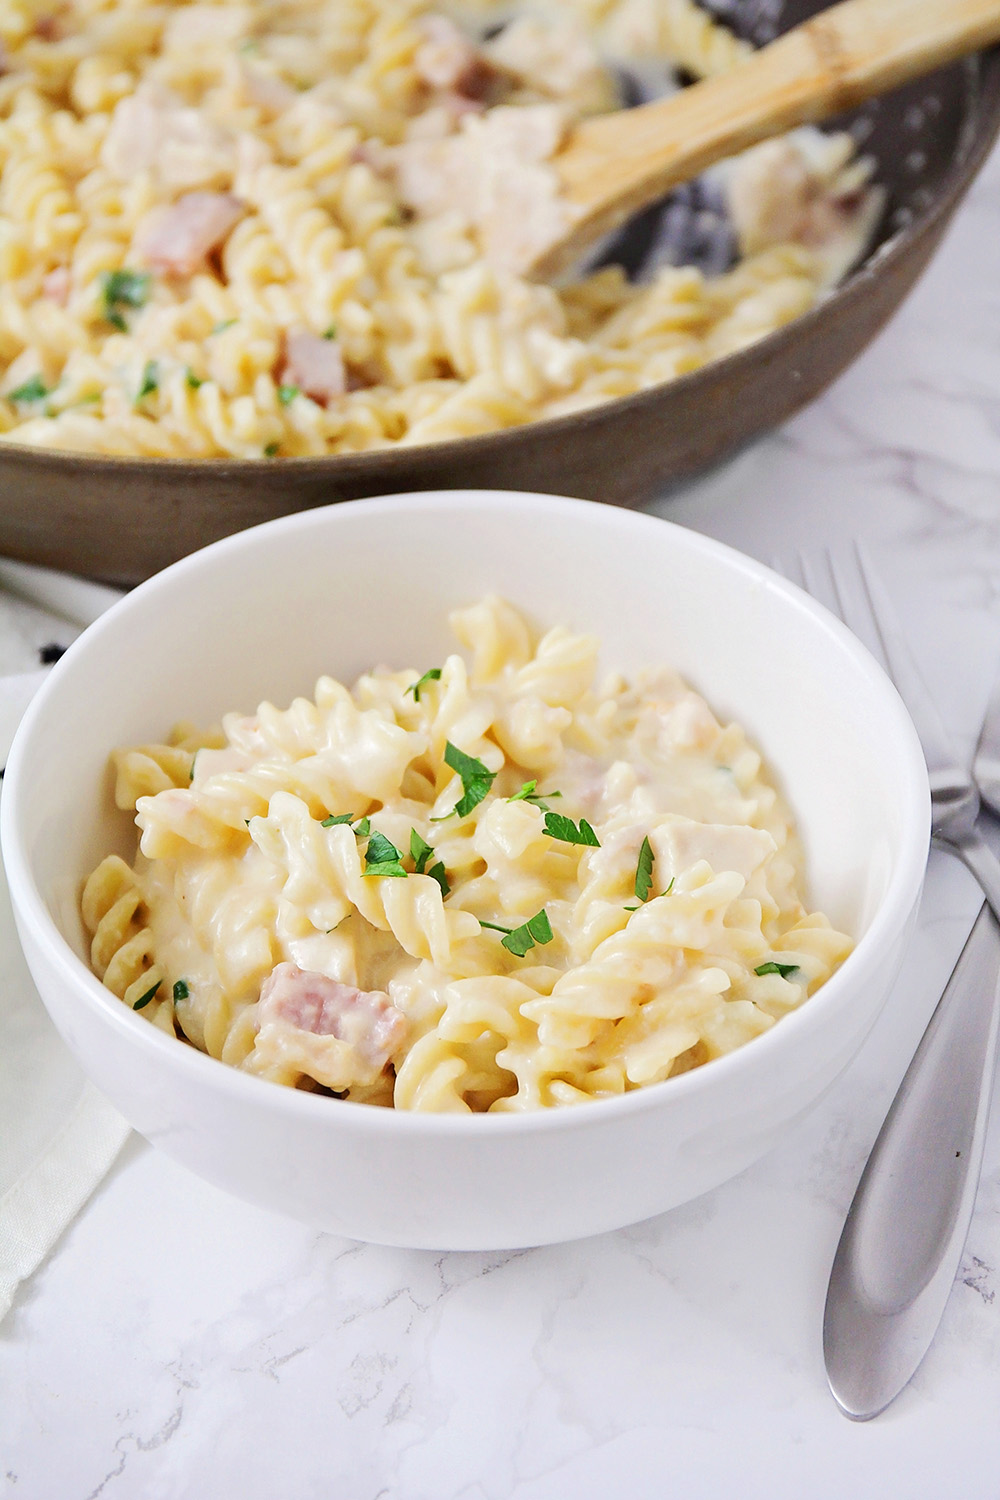 11 Creamy Pasta Recipes - These pasta recipes are creamy and simple, perfect for lunch and dinner!